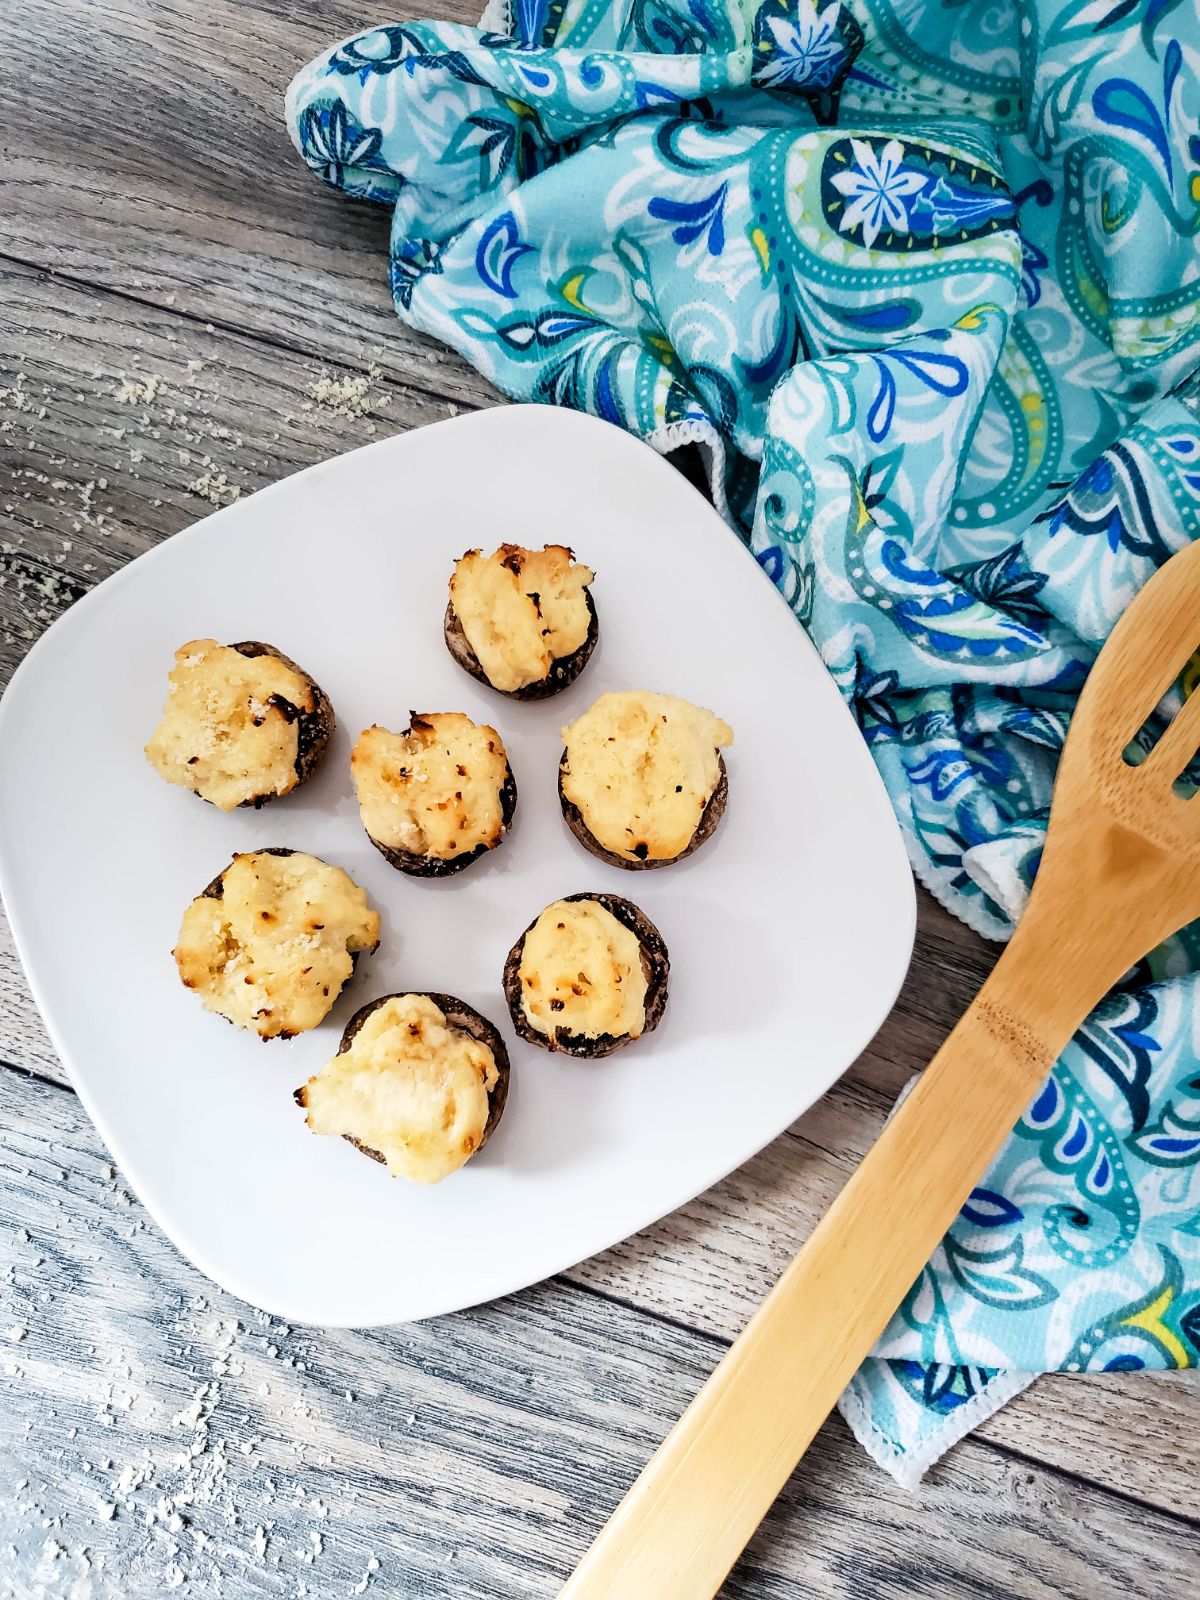 Grilled Stuffed Mushrooms with Cream Cheese on a white plate with wooden slotted spoon on the side on a blue decorative cloth